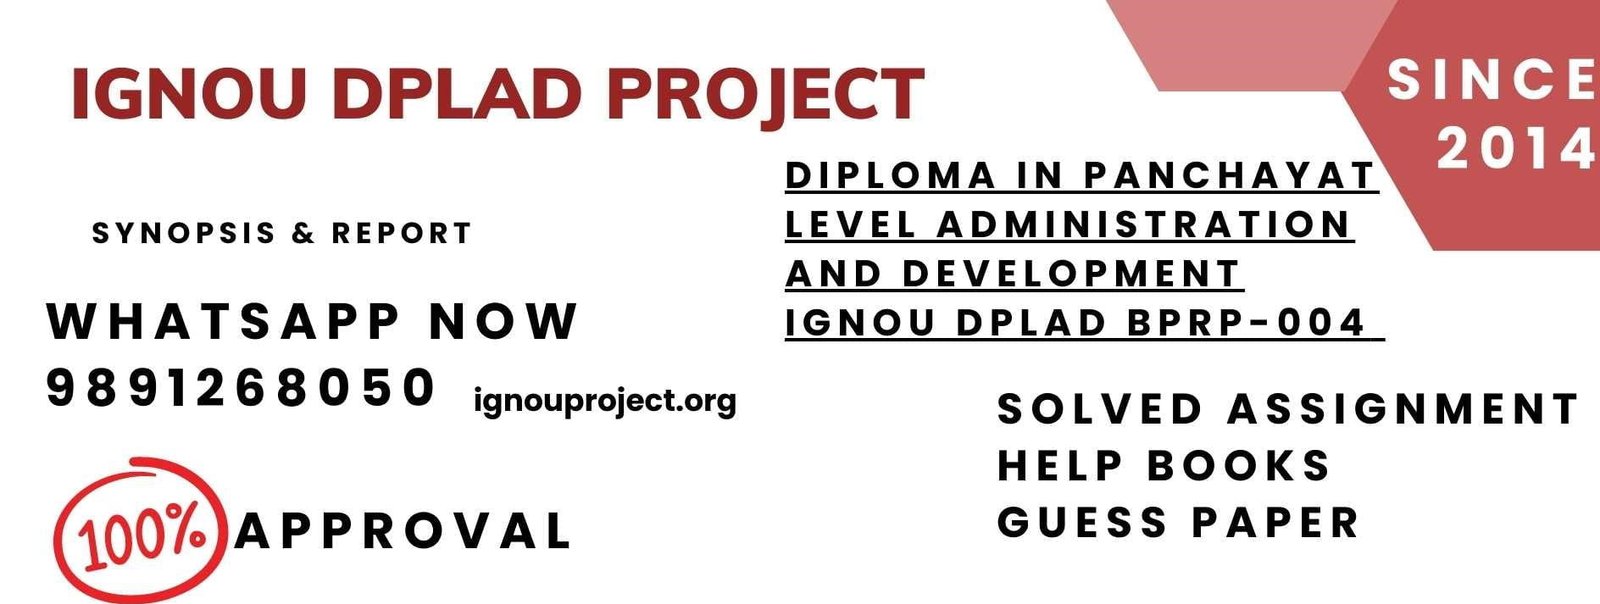 IGNOU DPLAD PROJECT (Diploma in Panchayat Level Administration and Development)